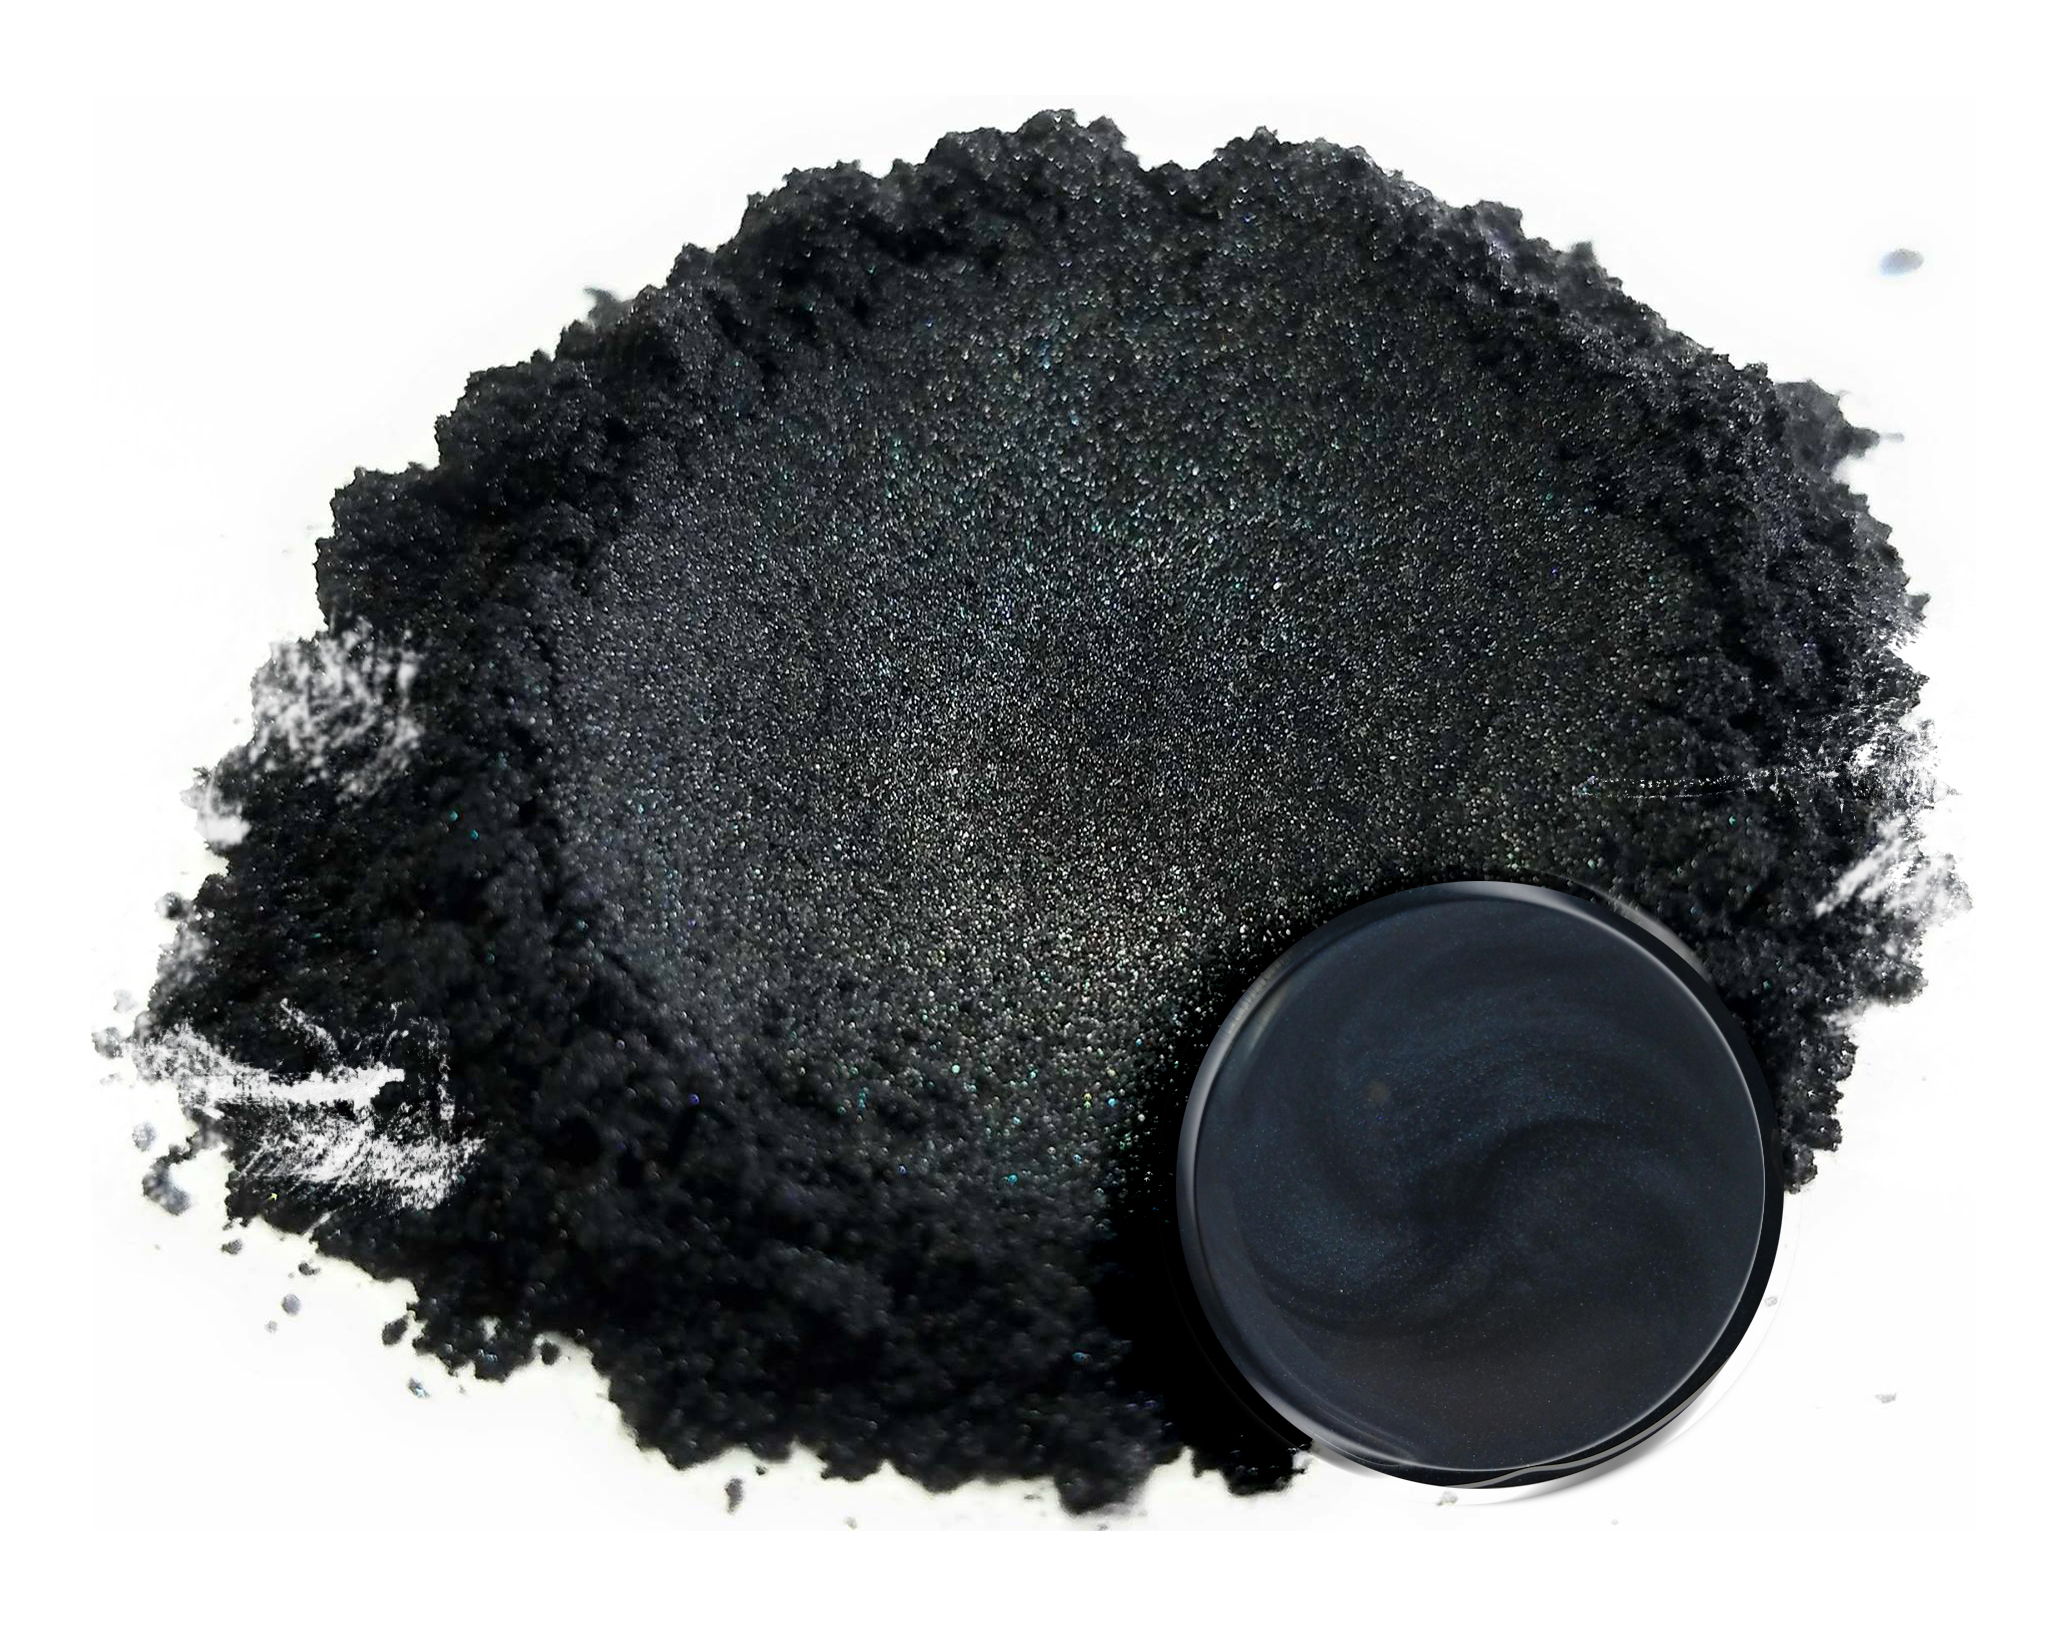 Blue Mica Powder Pigment (100g) -Cosmetic Grade Metallic Mica Powder for Epoxy Resin, Lip Gloss, Soap,Candle Making, Bath Bombs,Tumblers, Jewelry